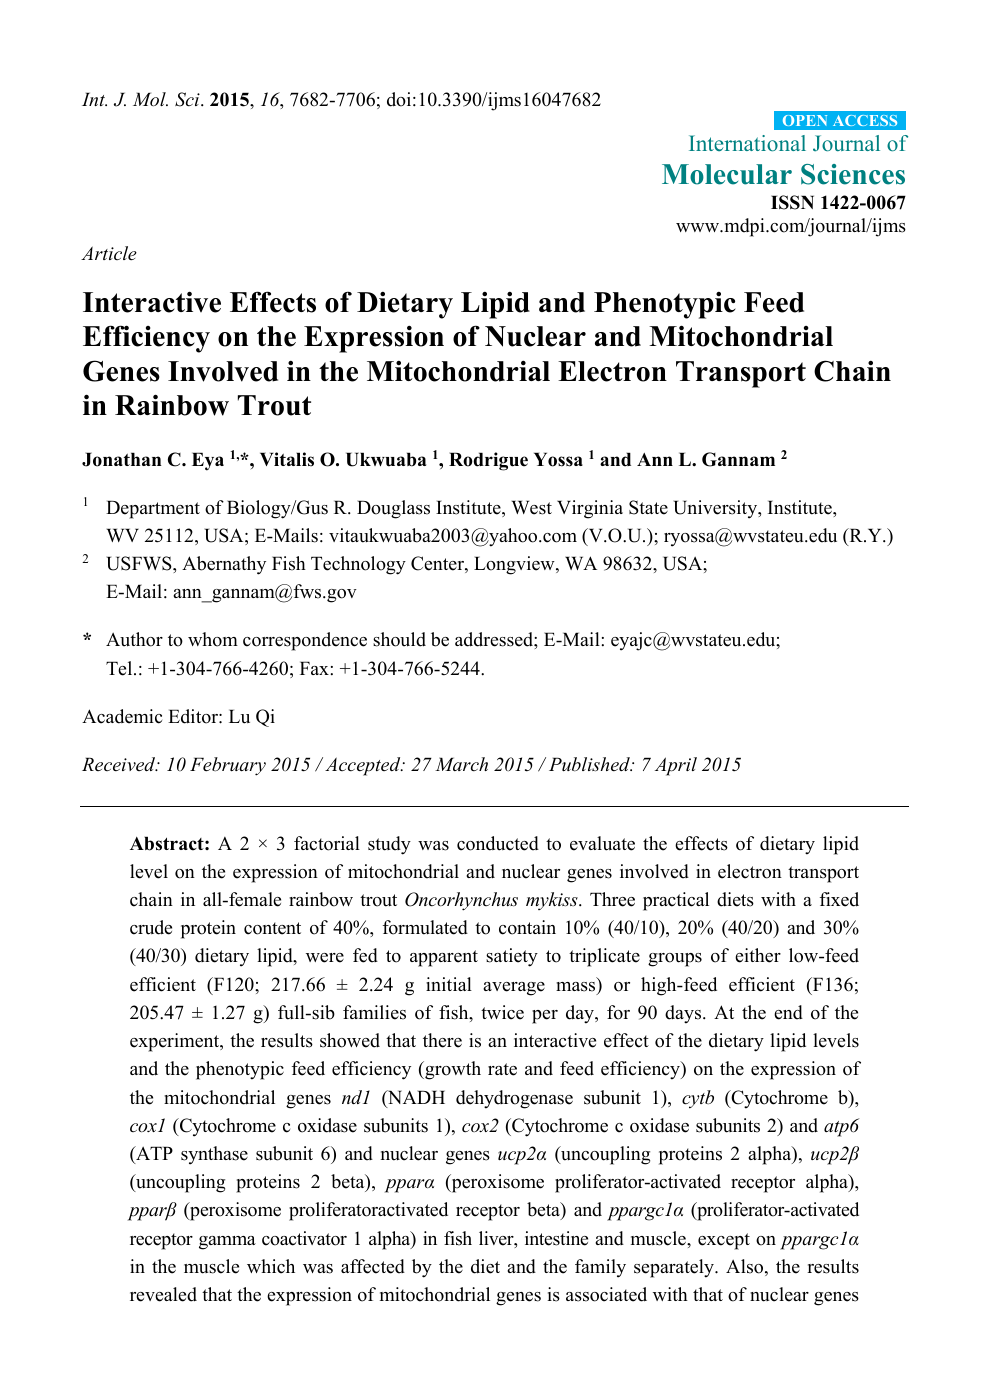 Interactive Effects Of Dietary Lipid And Phenotypic Feed Efficiency On The Expression Of Nuclear And Mitochondrial Genes Involved In The Mitochondrial Electron Transport Chain In Rainbow Trout Topic Of Research Paper